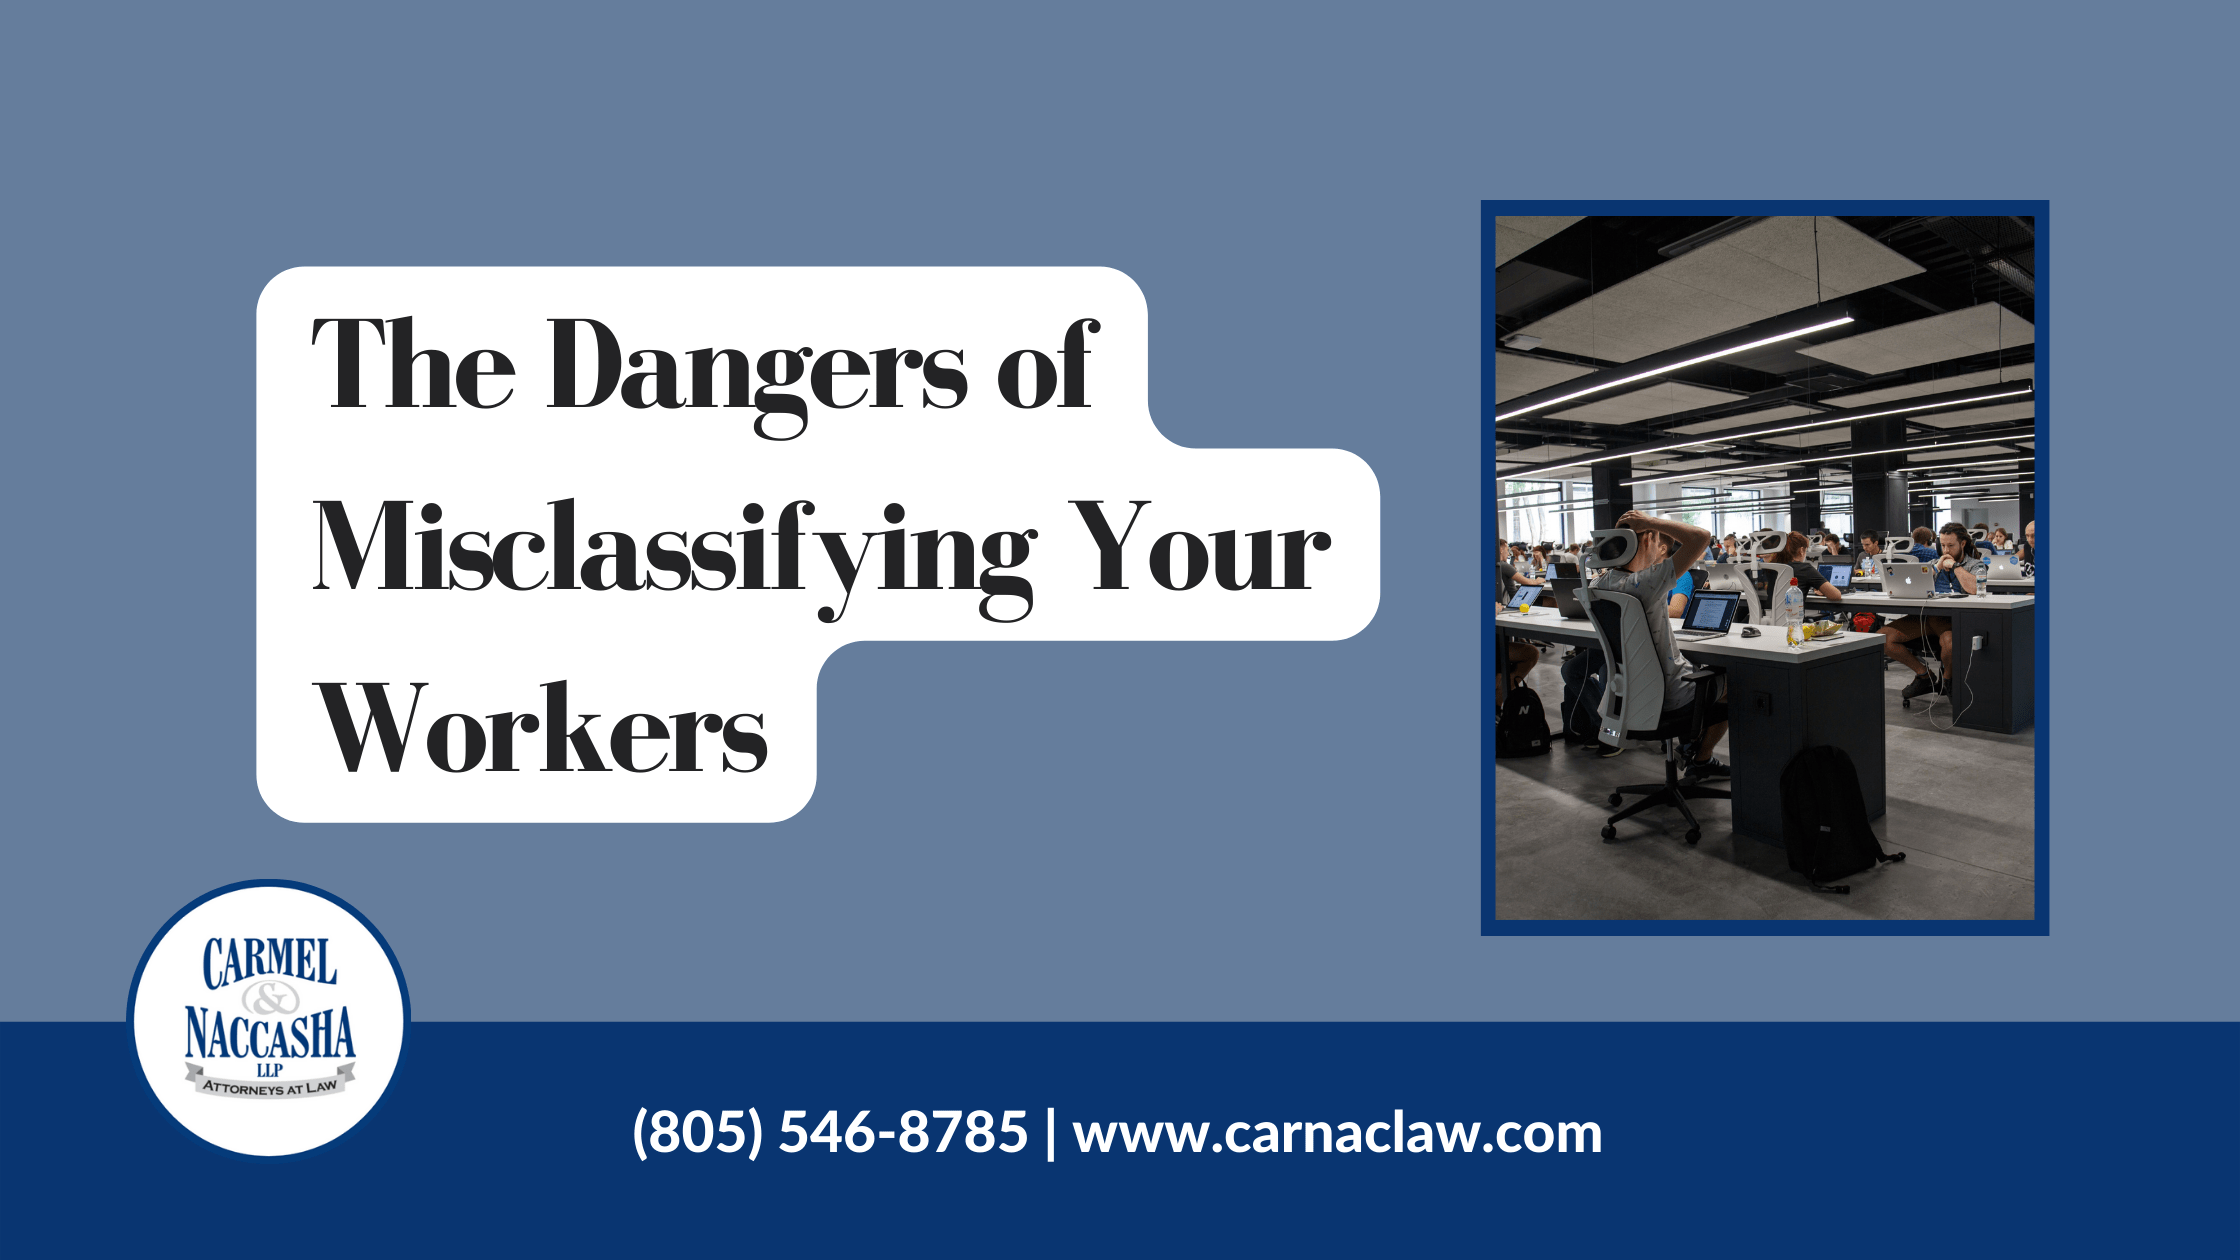 The Dangers of Misclassifying Your Workers